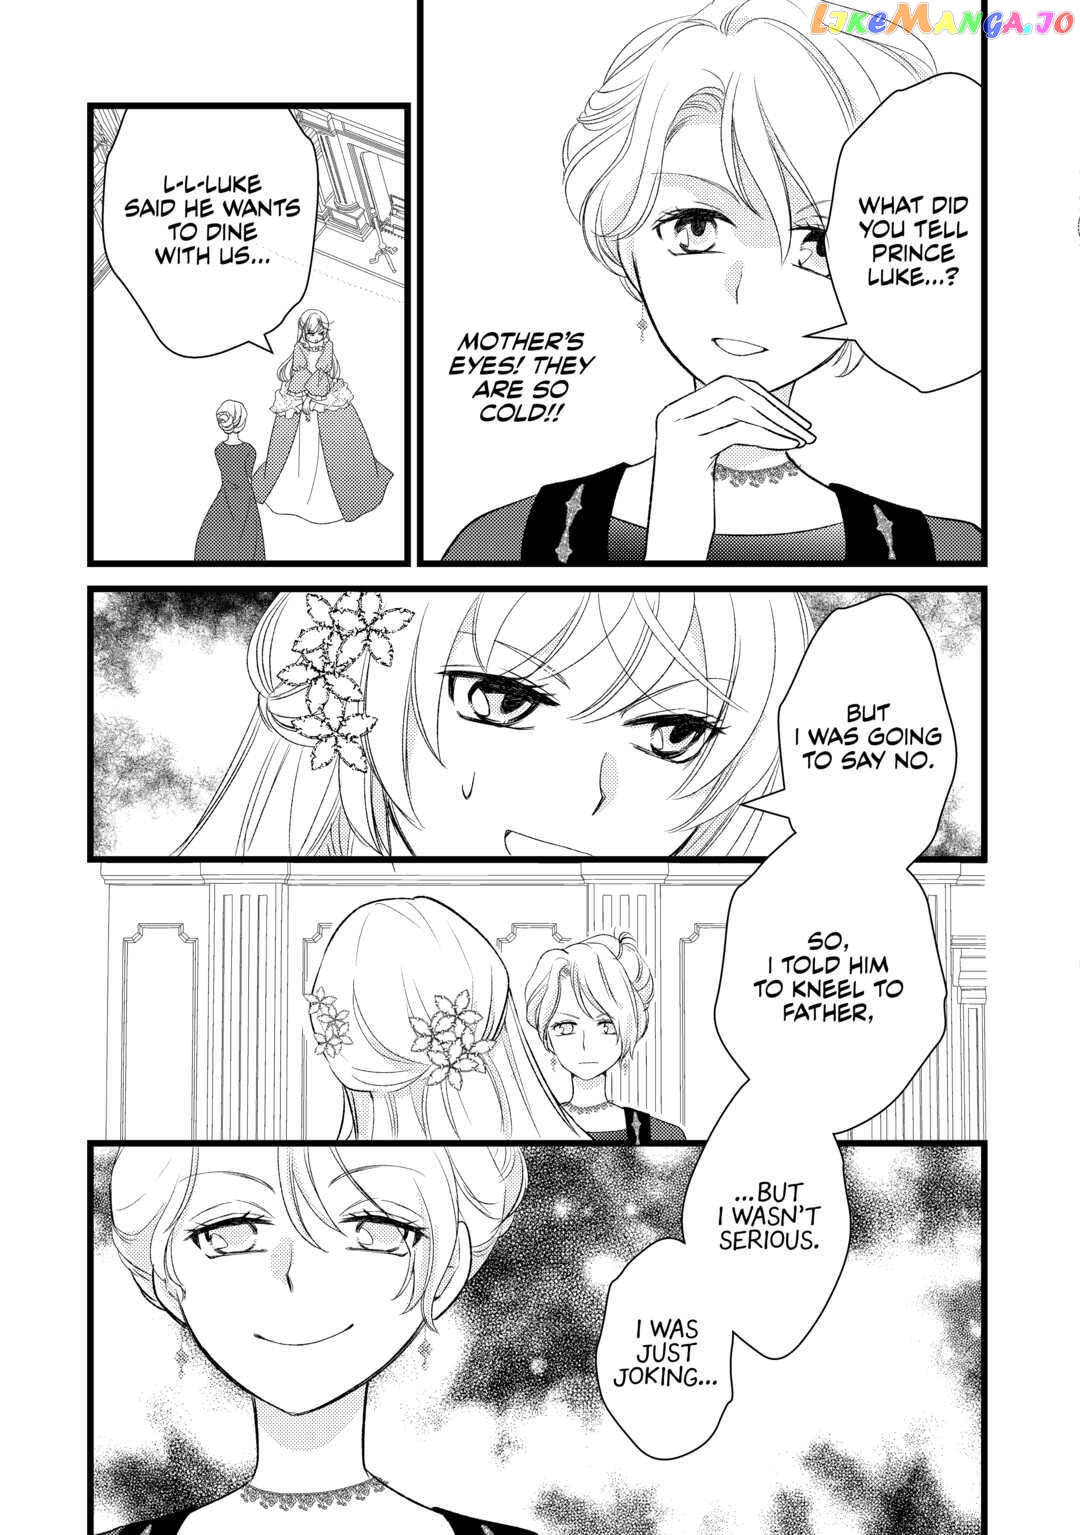 My Engagement Got Broken Off (Lol) (Official) Chapter 10 - page 17